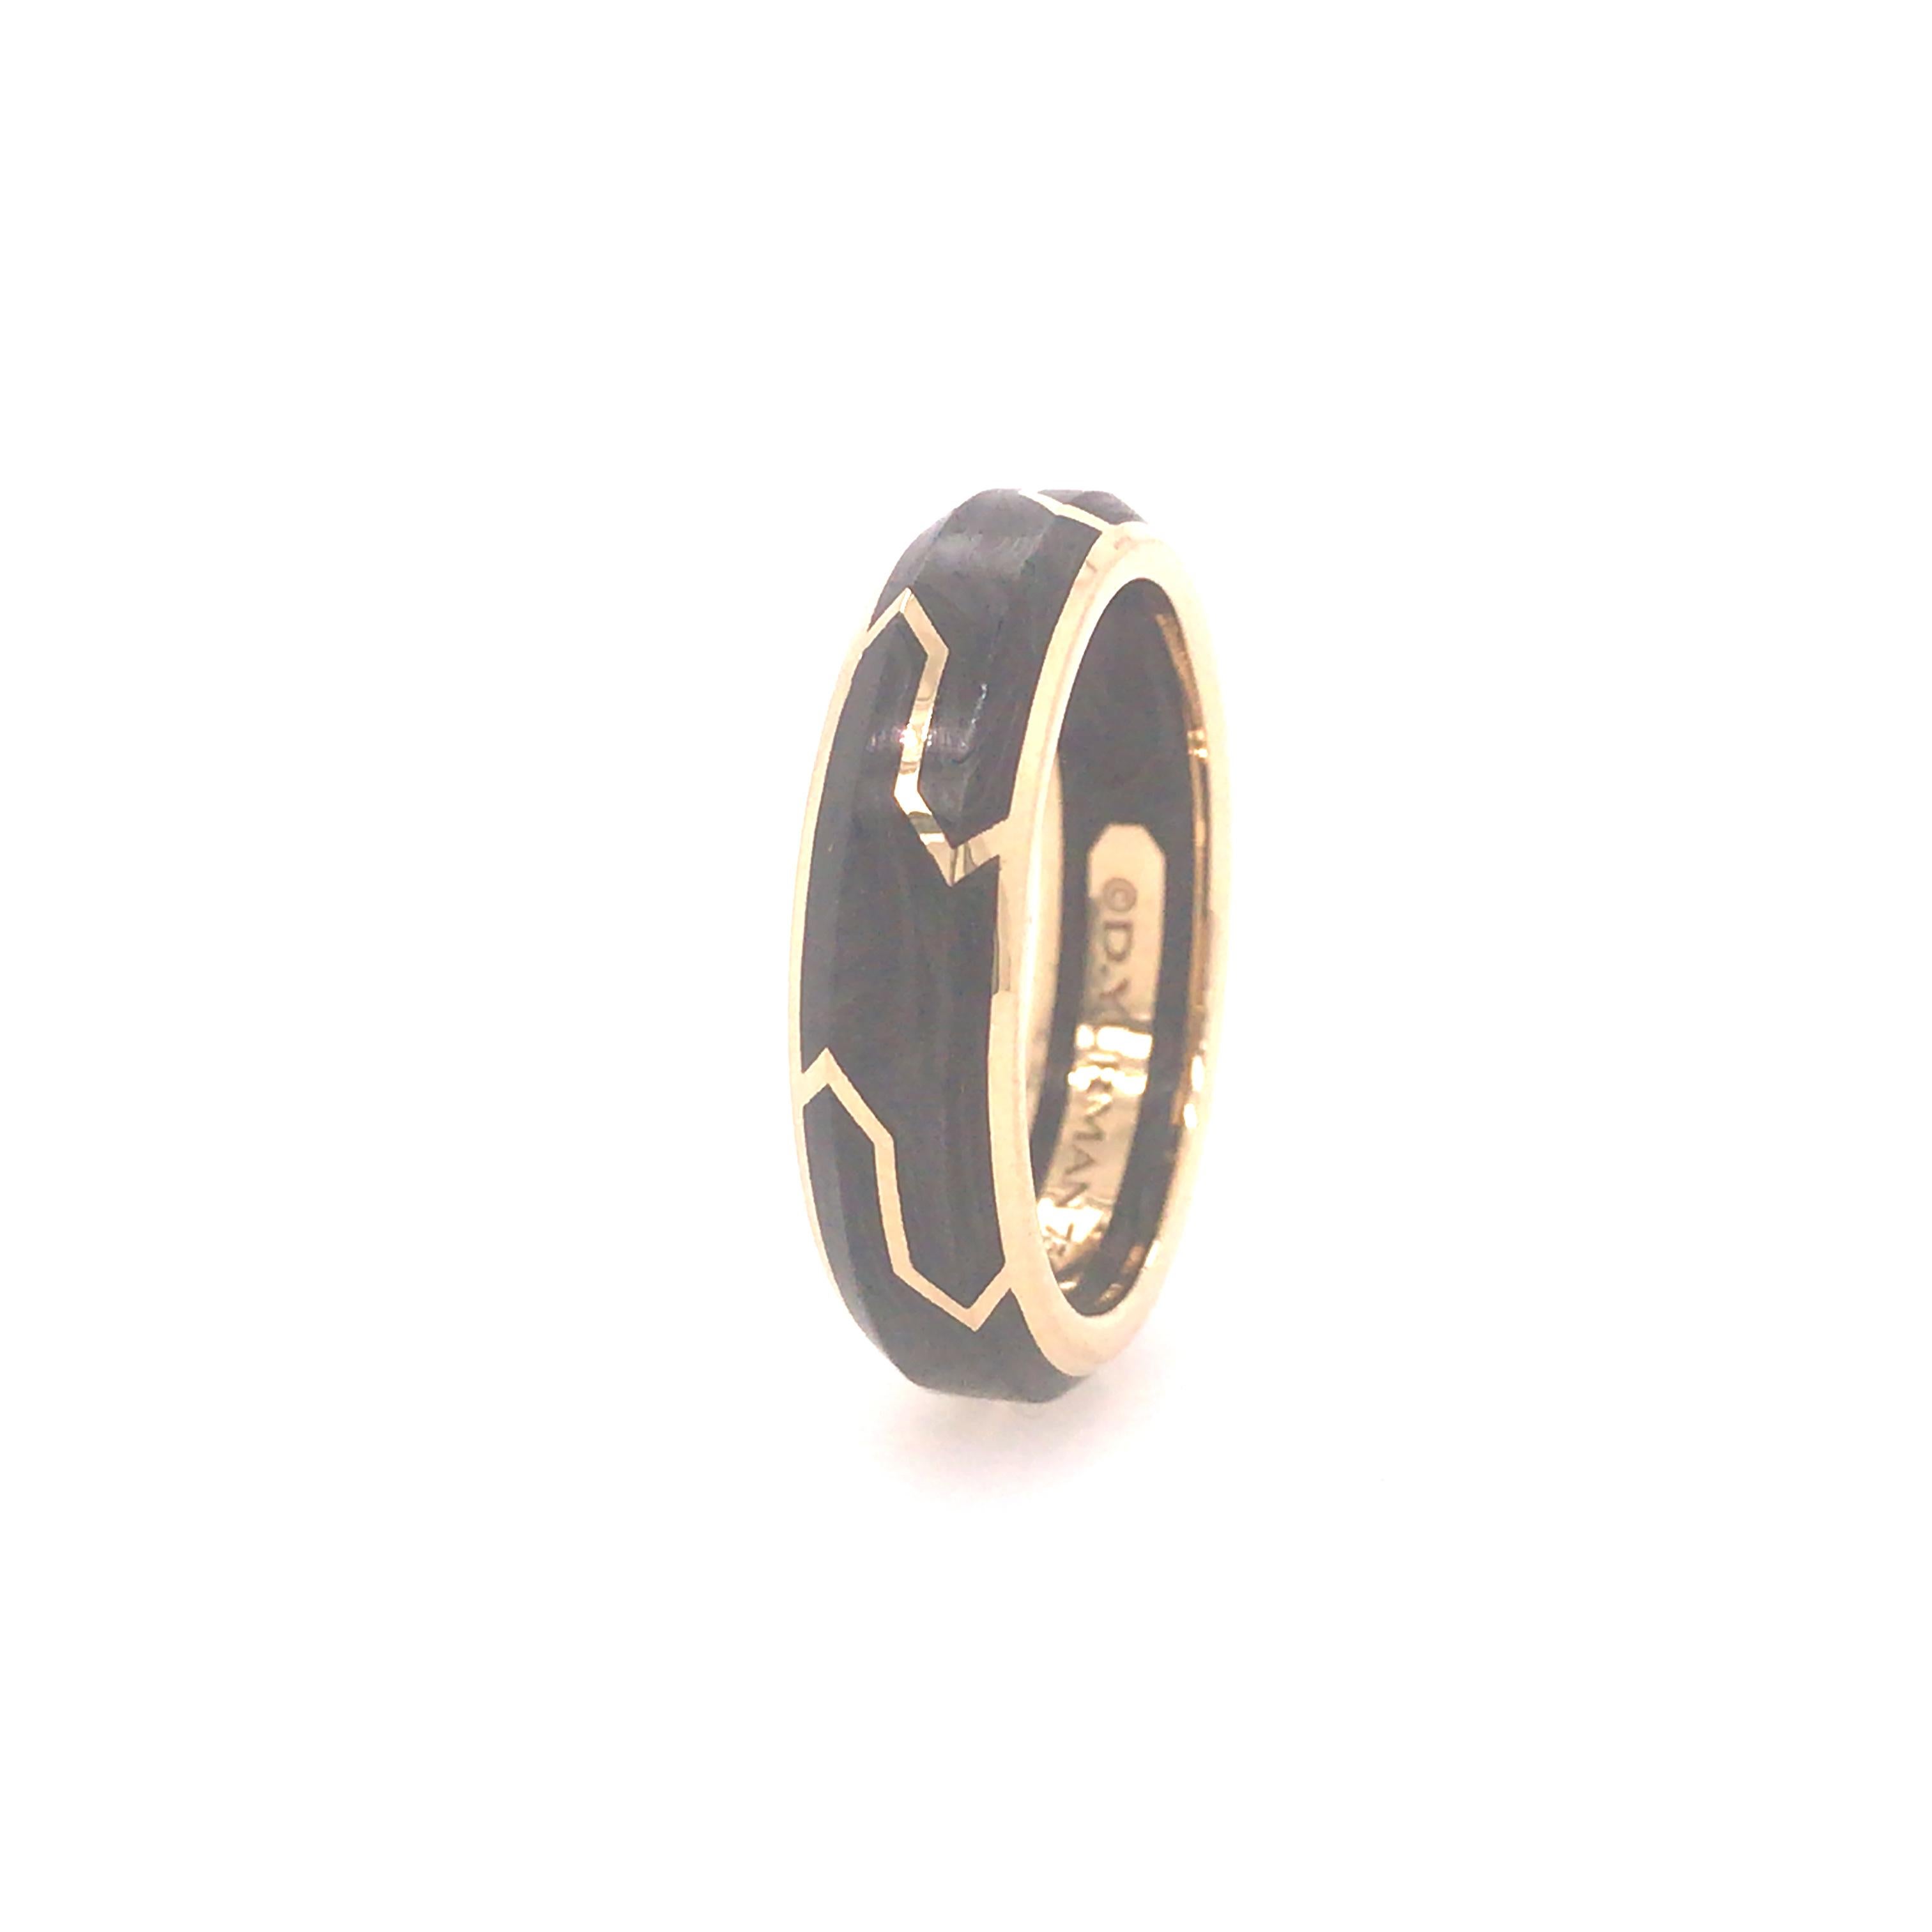 David Yurman’s Forged Carbon Collection  18 Yellow Gold and Forged Carbon Band, 6mm wide.  Ring size 8.5.  5.13 grams. Signed.